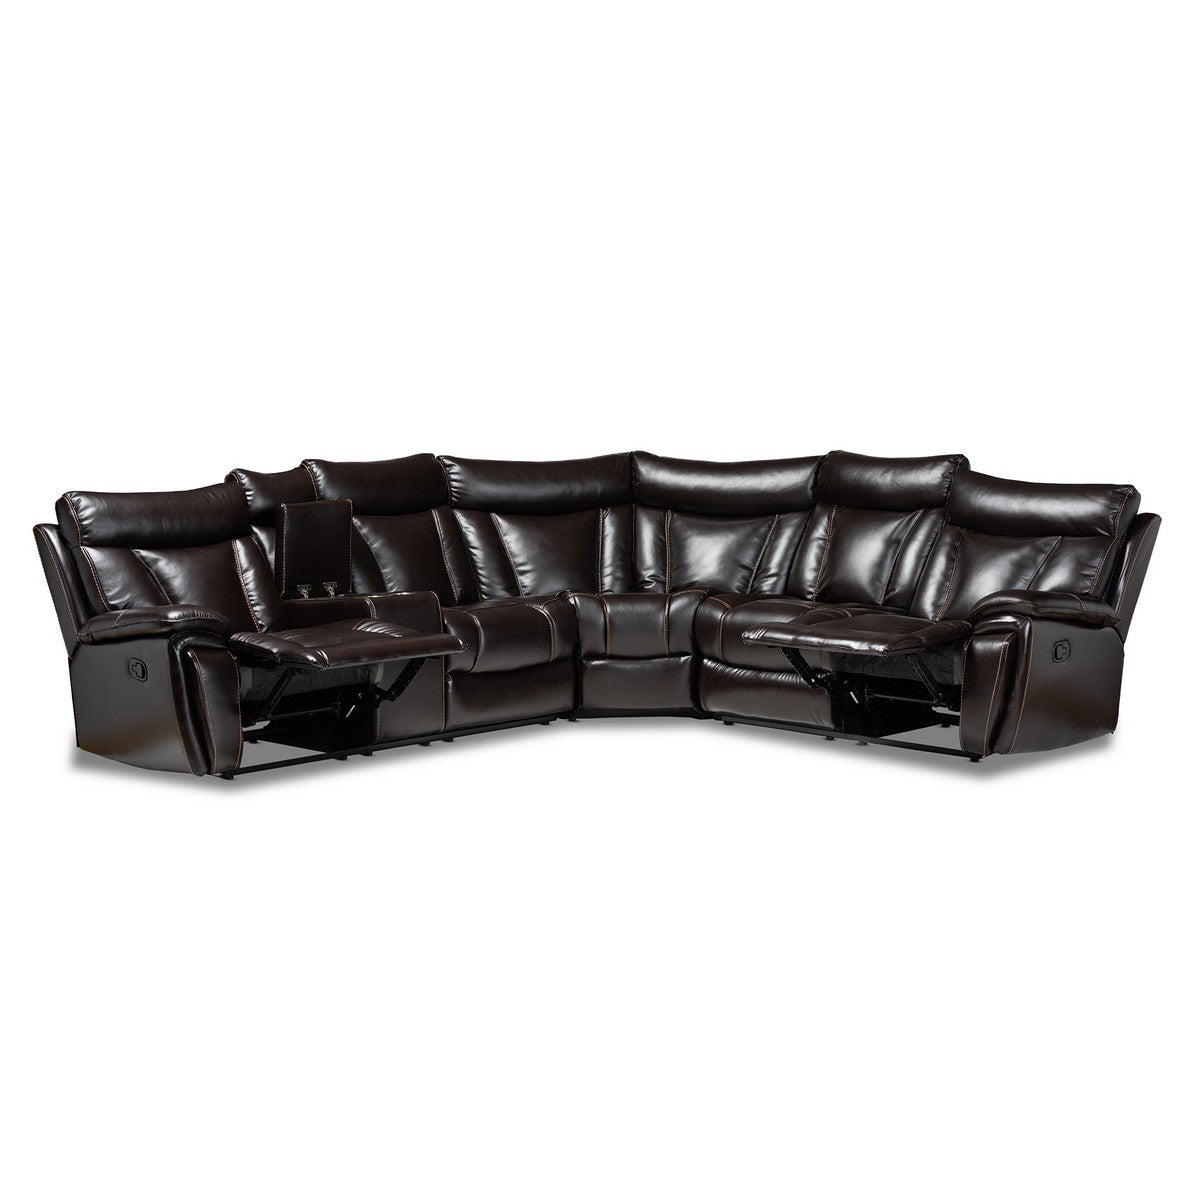 Baxton Studio Lewis Modern and Contemporary Dark Brown Faux Leather Upholstered 6-Piece Reclining Sectional Sofa